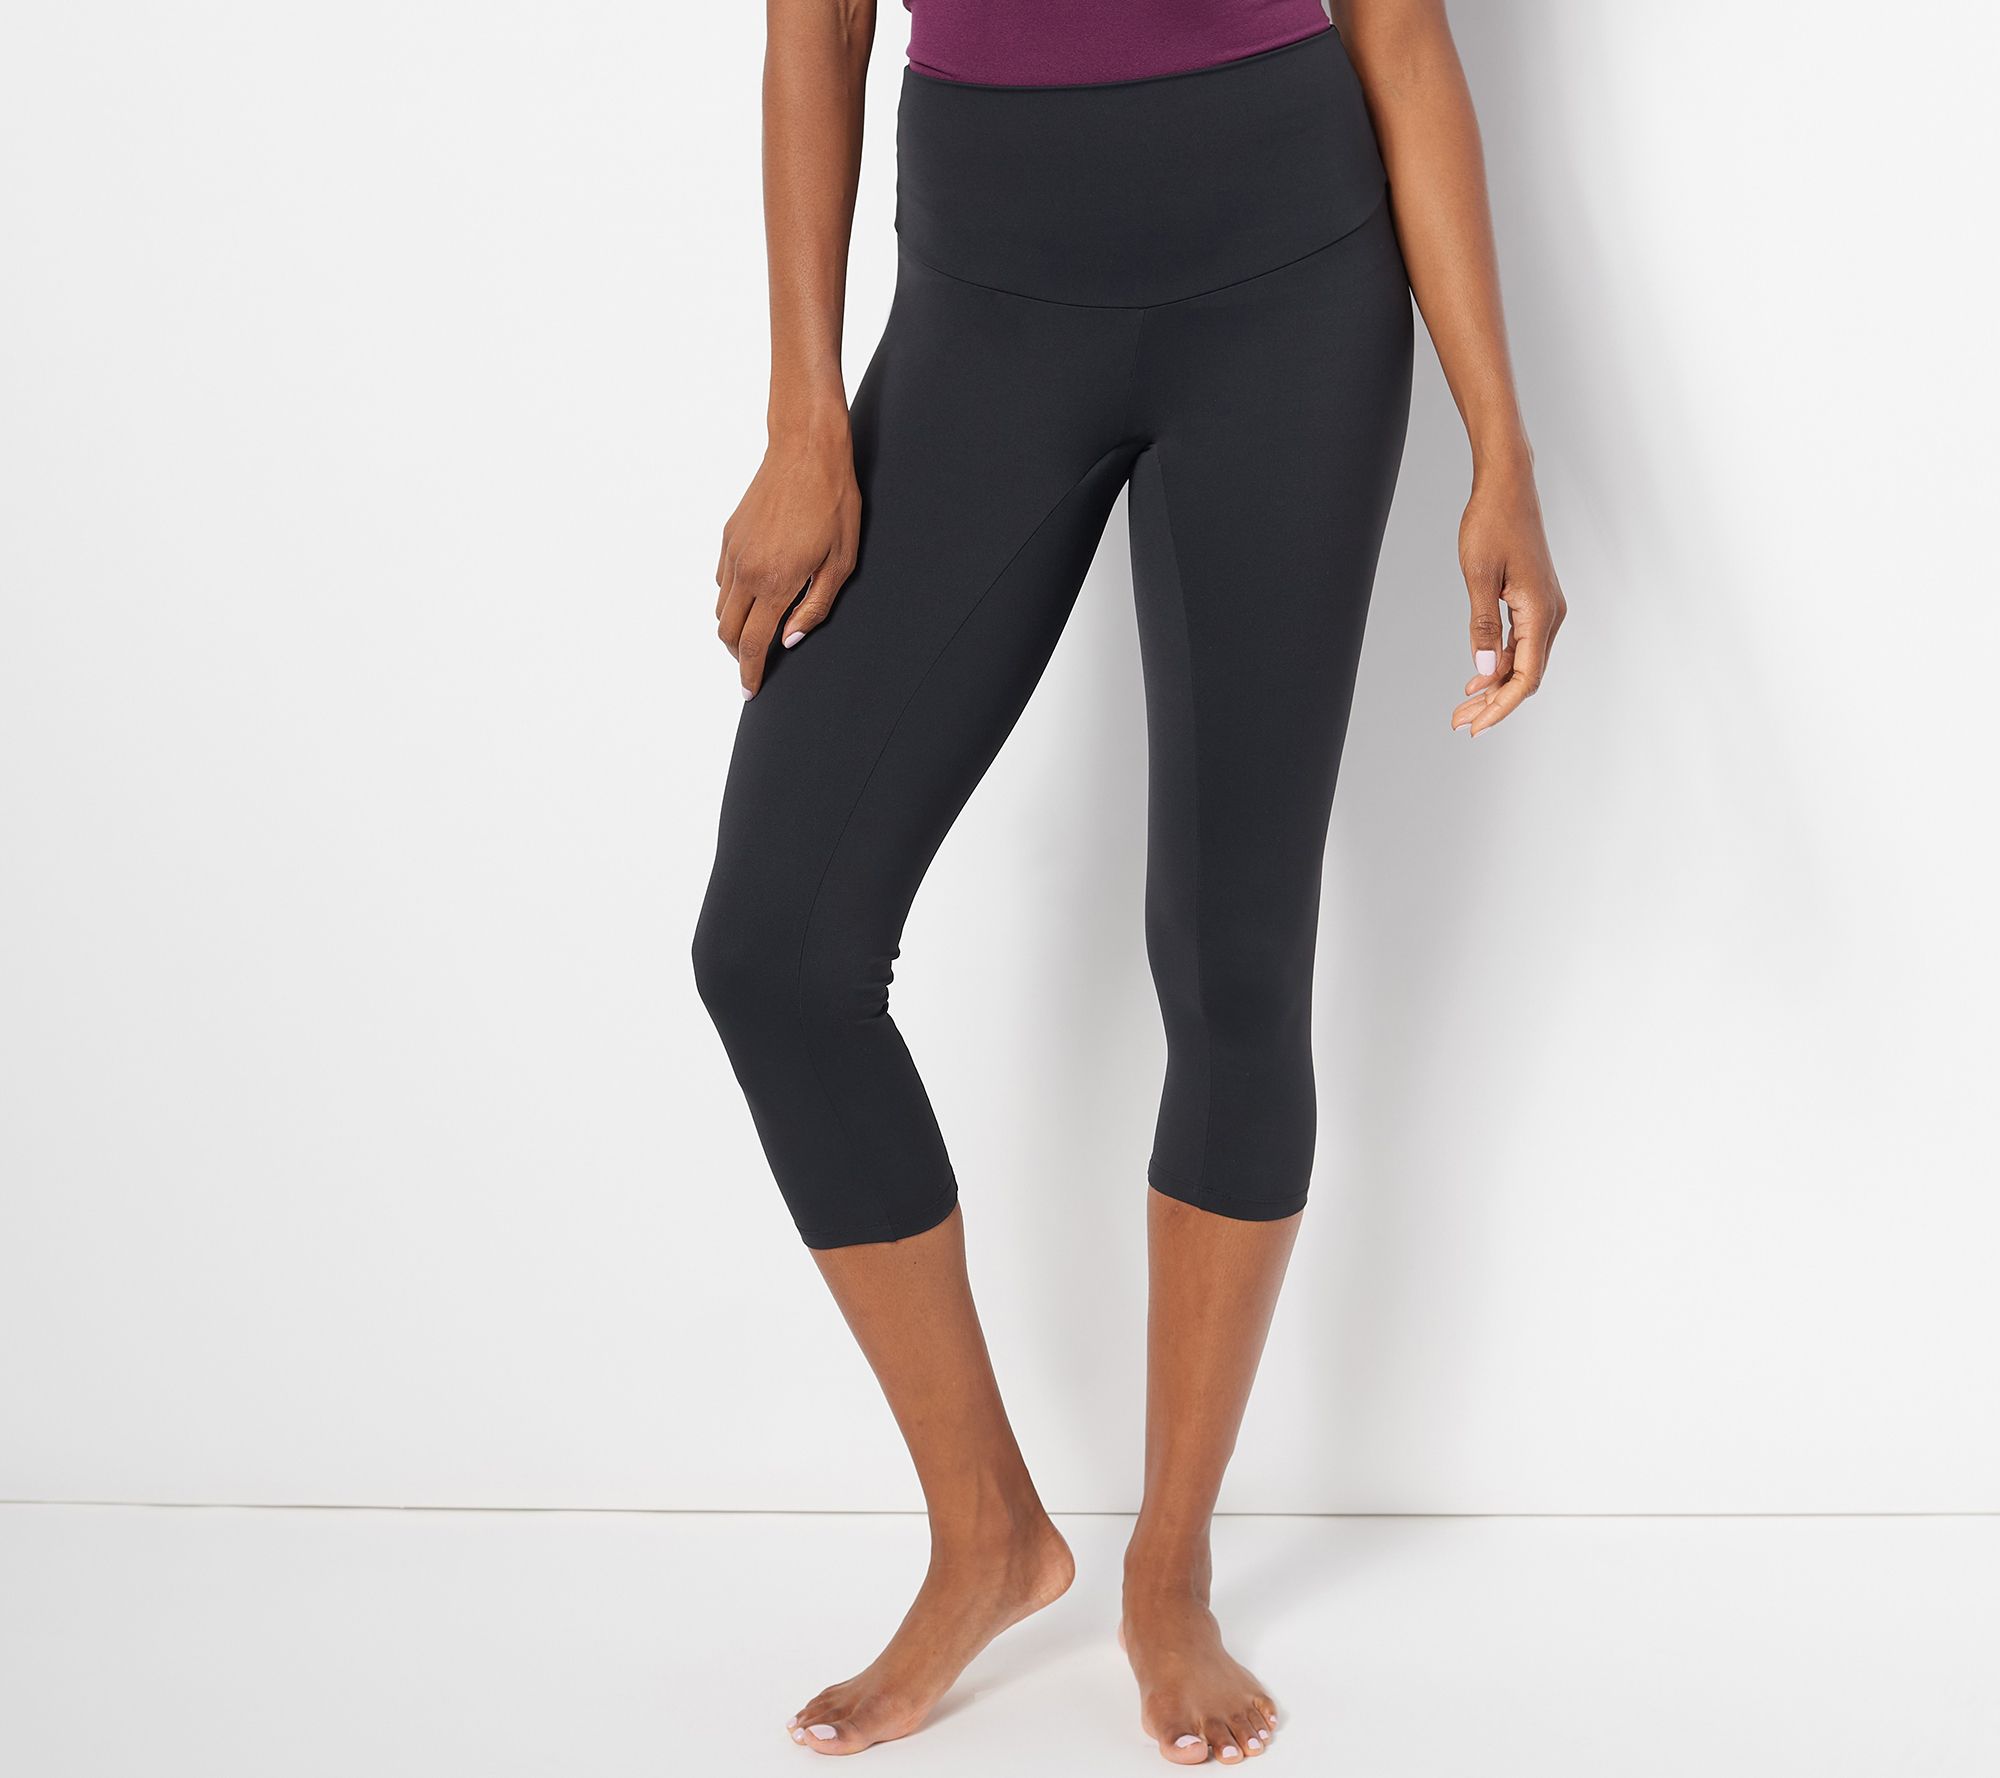 lululemon athletica, Pants & Jumpsuits, Lululemon Black Sexy Leggings  Size 8 And They Perk Up Your Behind